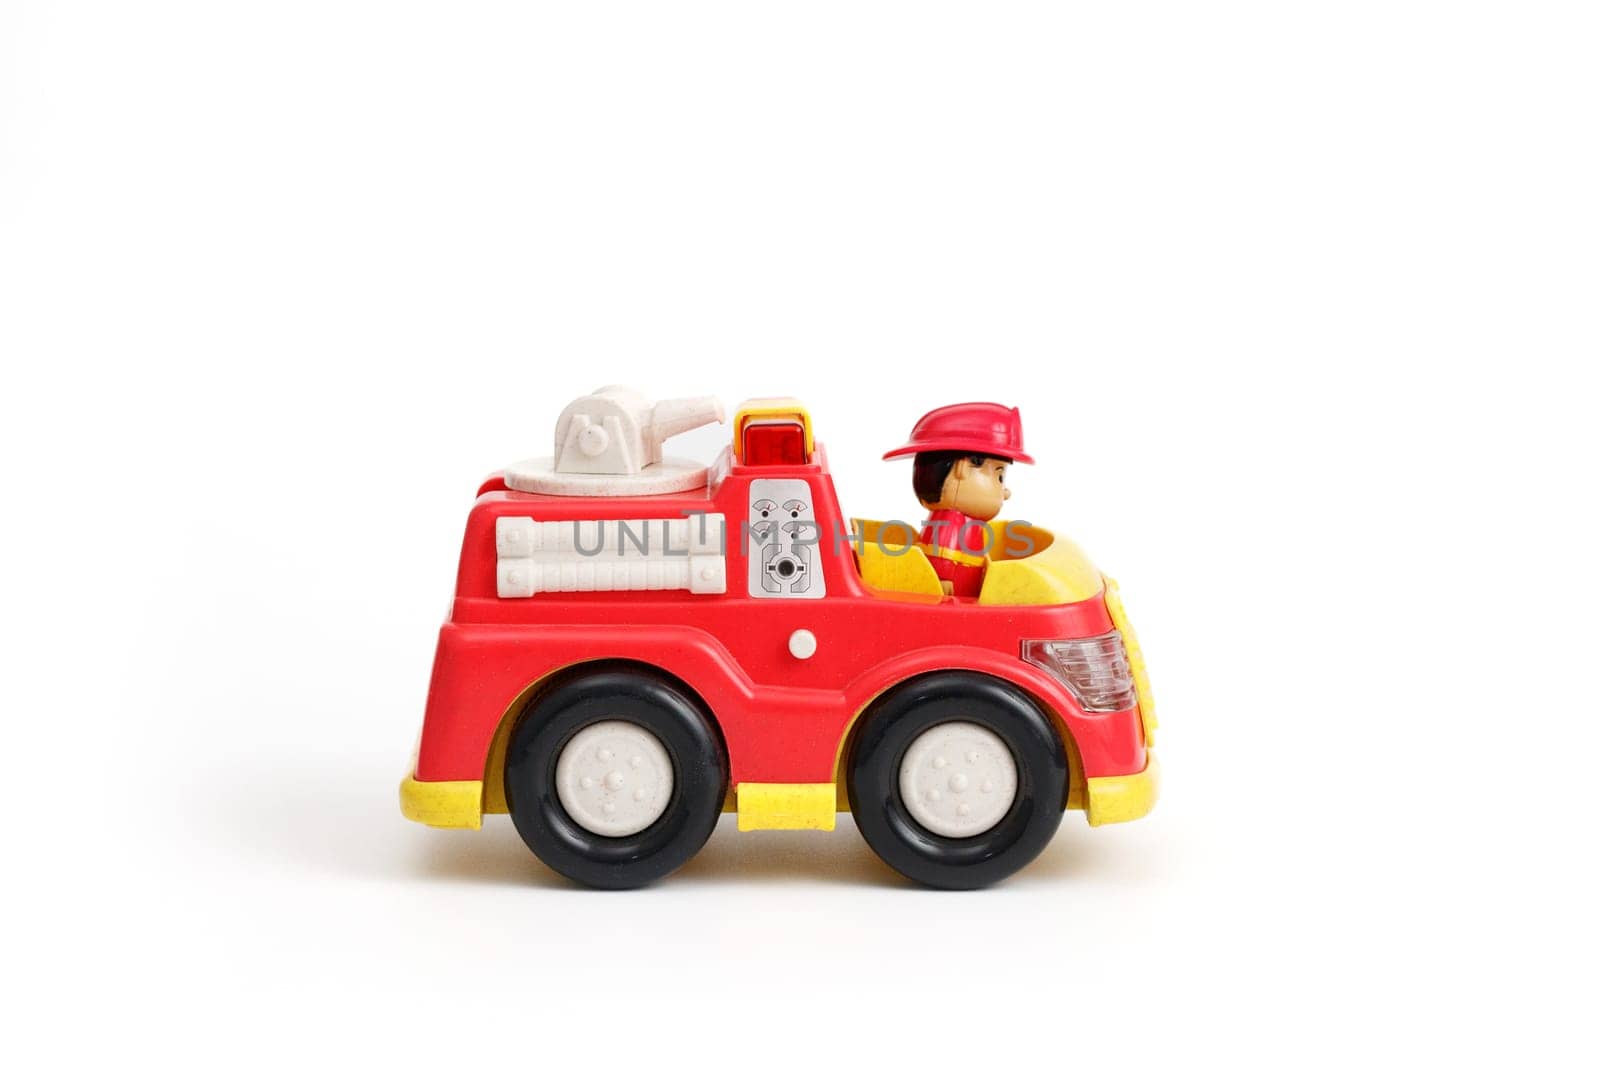 Kids toy plastic red fire truck with driver in the cabin, isolated on white background.